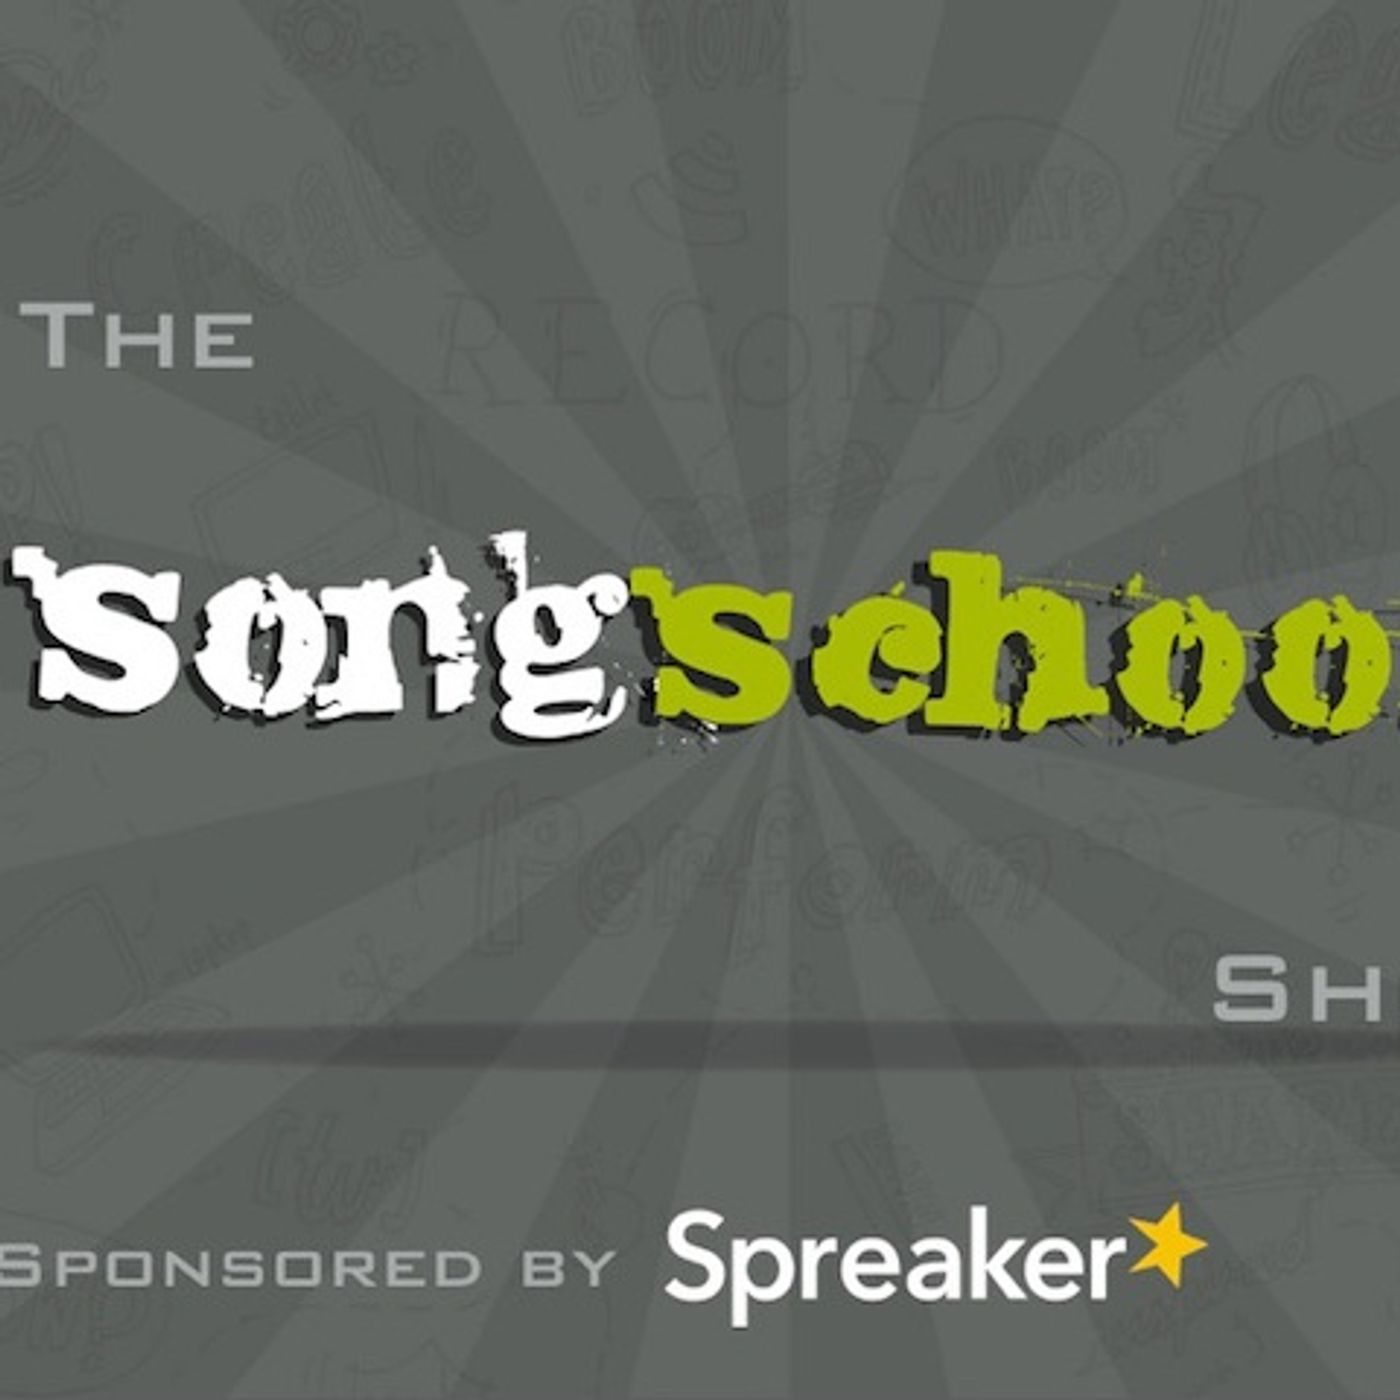 The Songschool Show @ Mercy Waterford